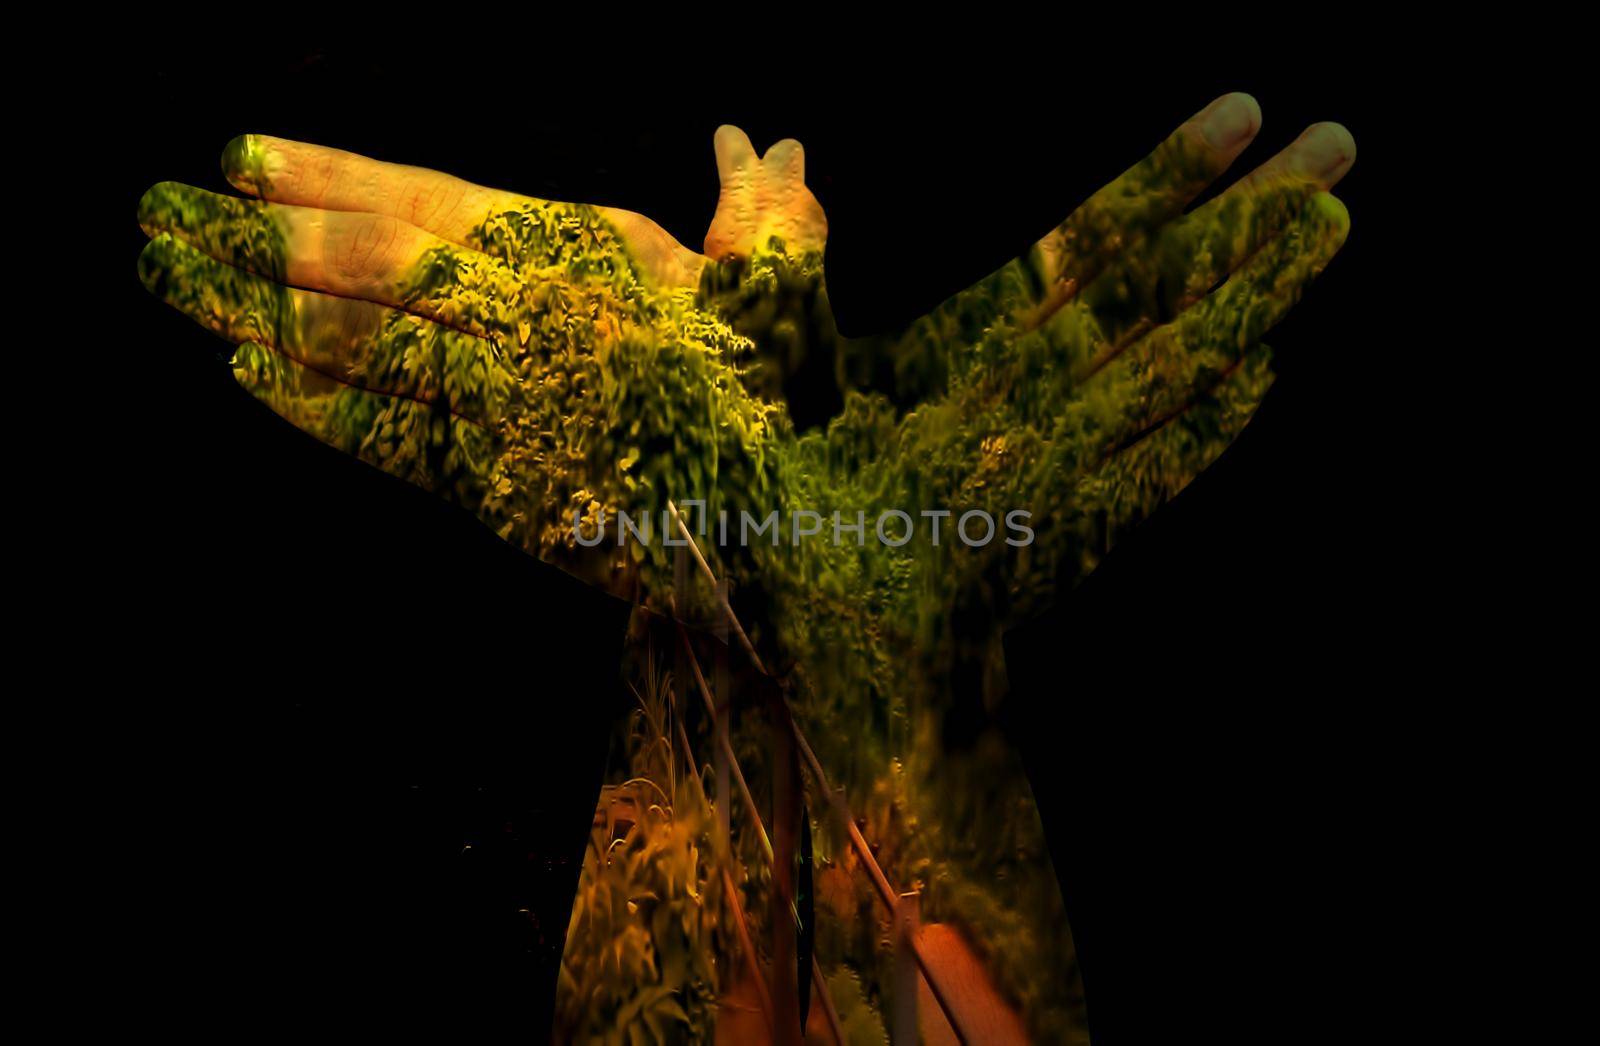 Double exposure shot of pair of hands with some caring hand sign isolated. Concept of care for mother nature.